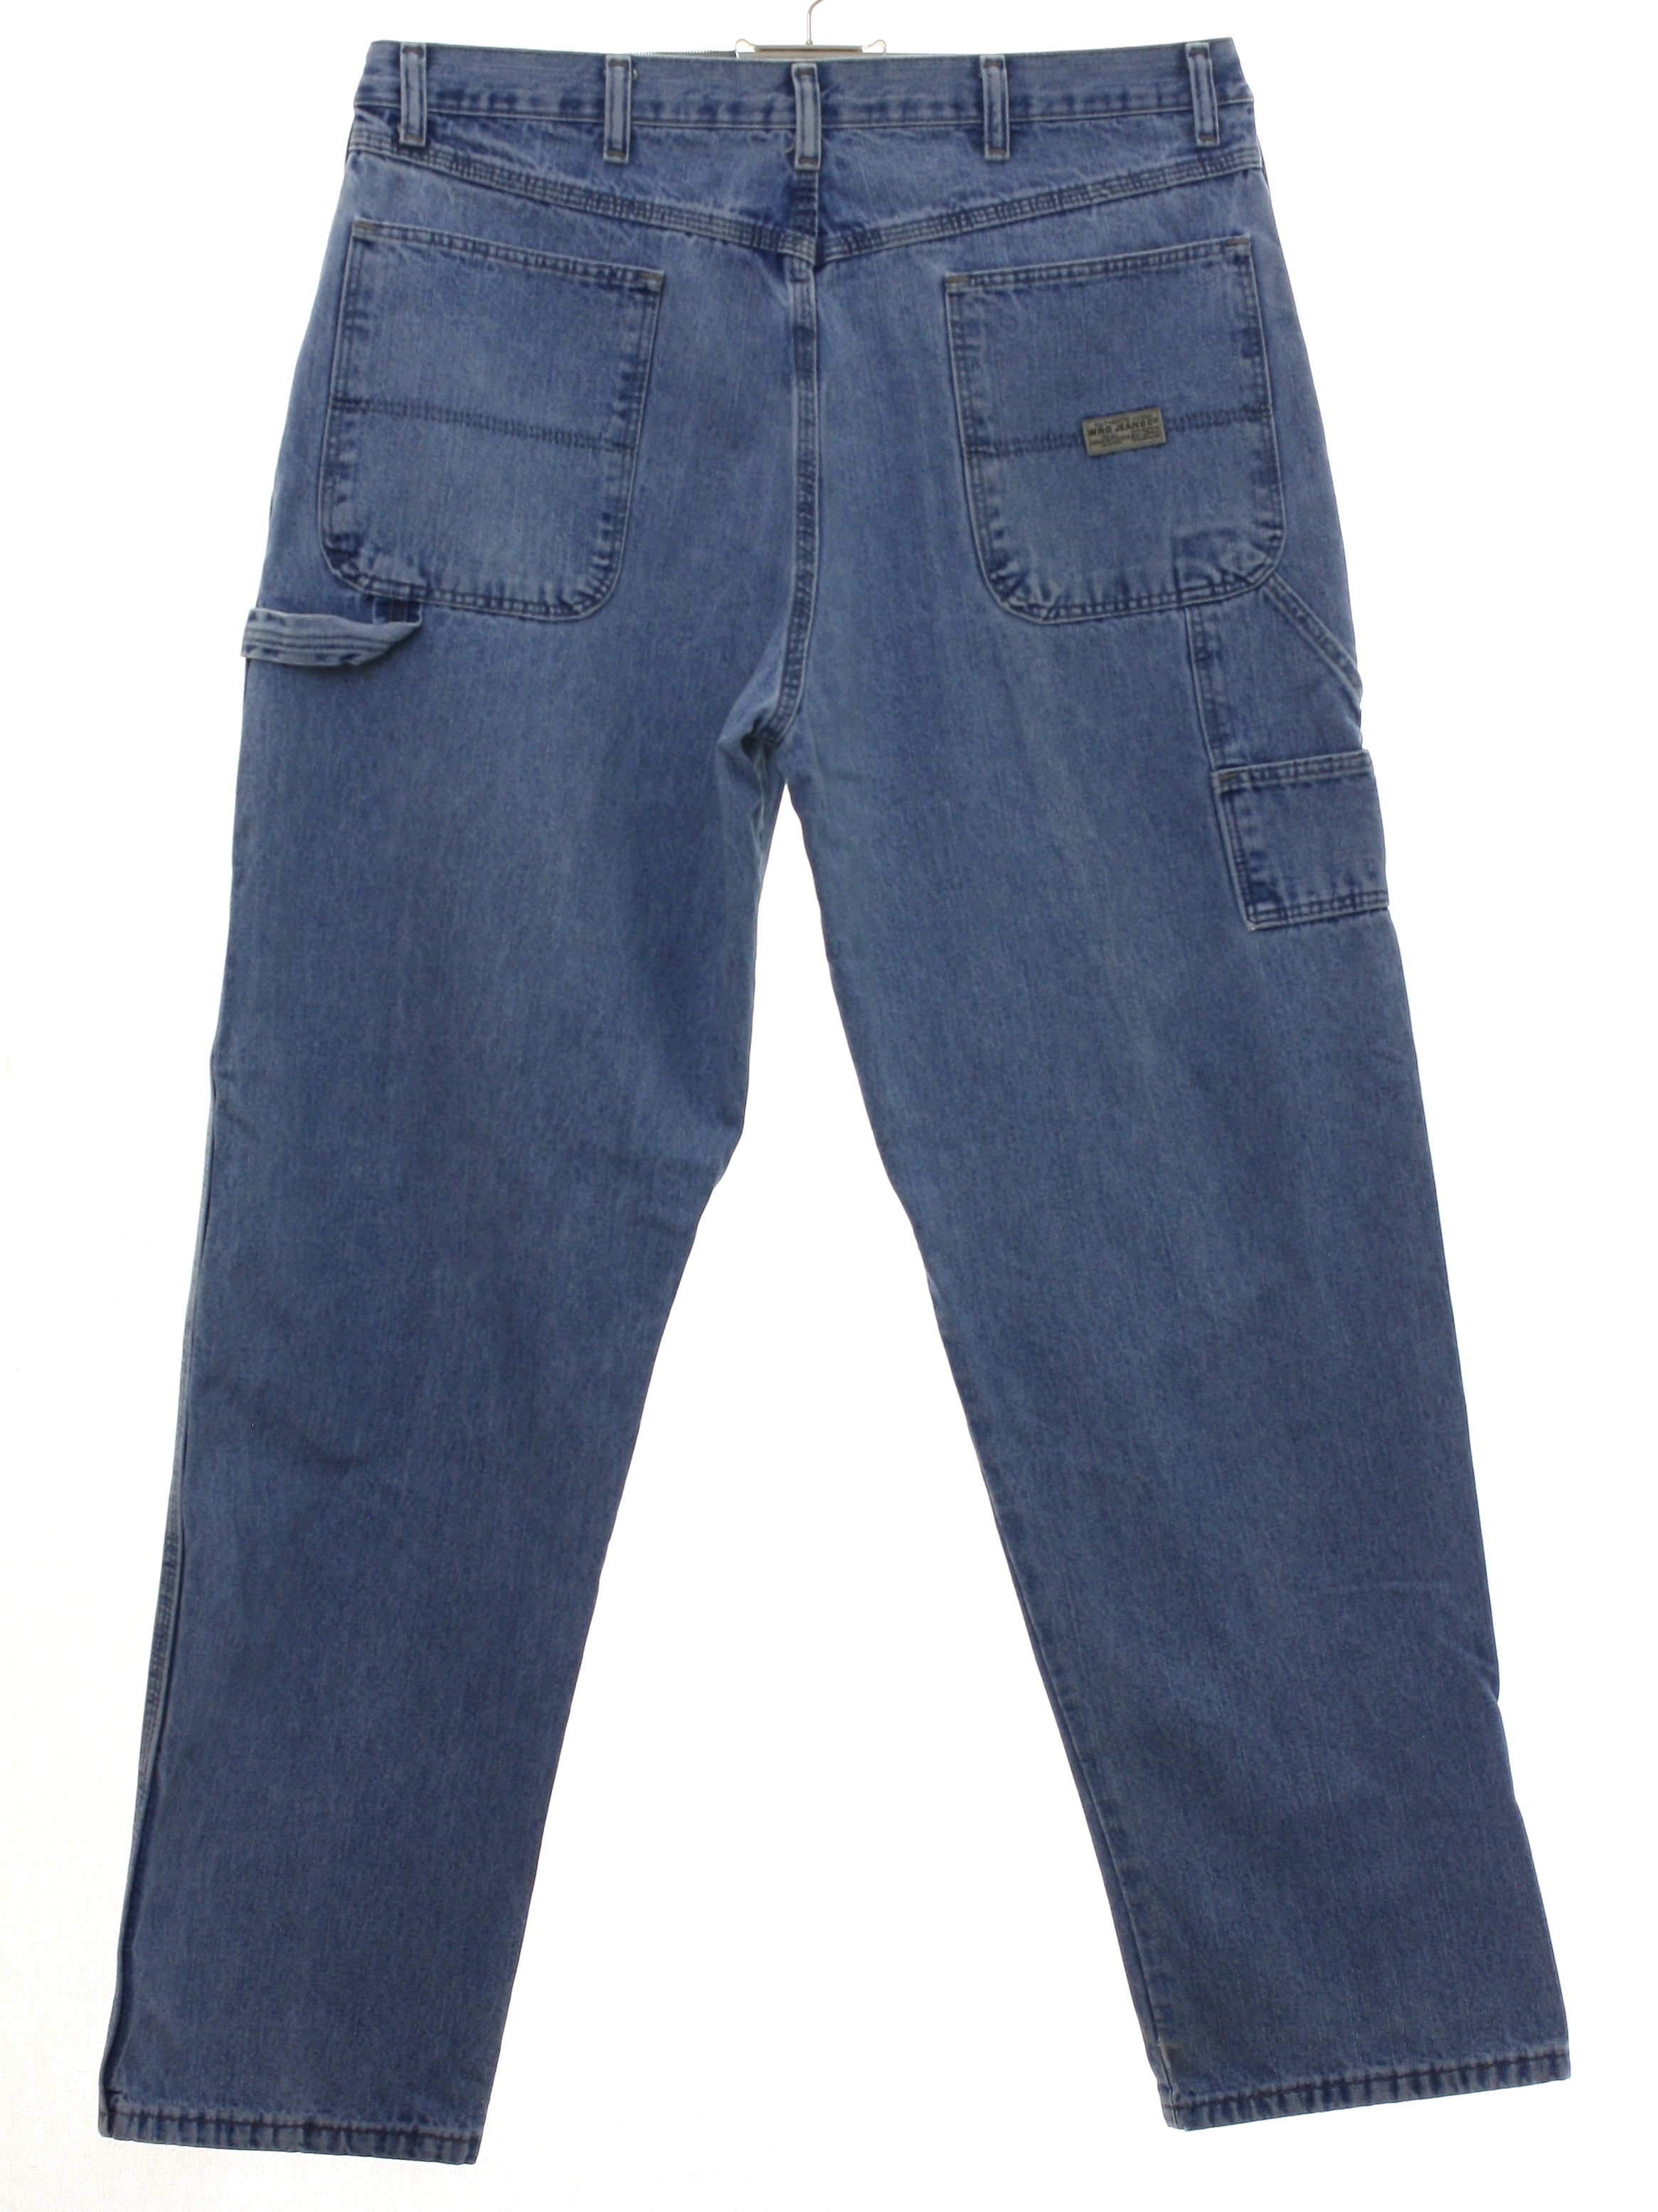 wrg jeans co cargo pants